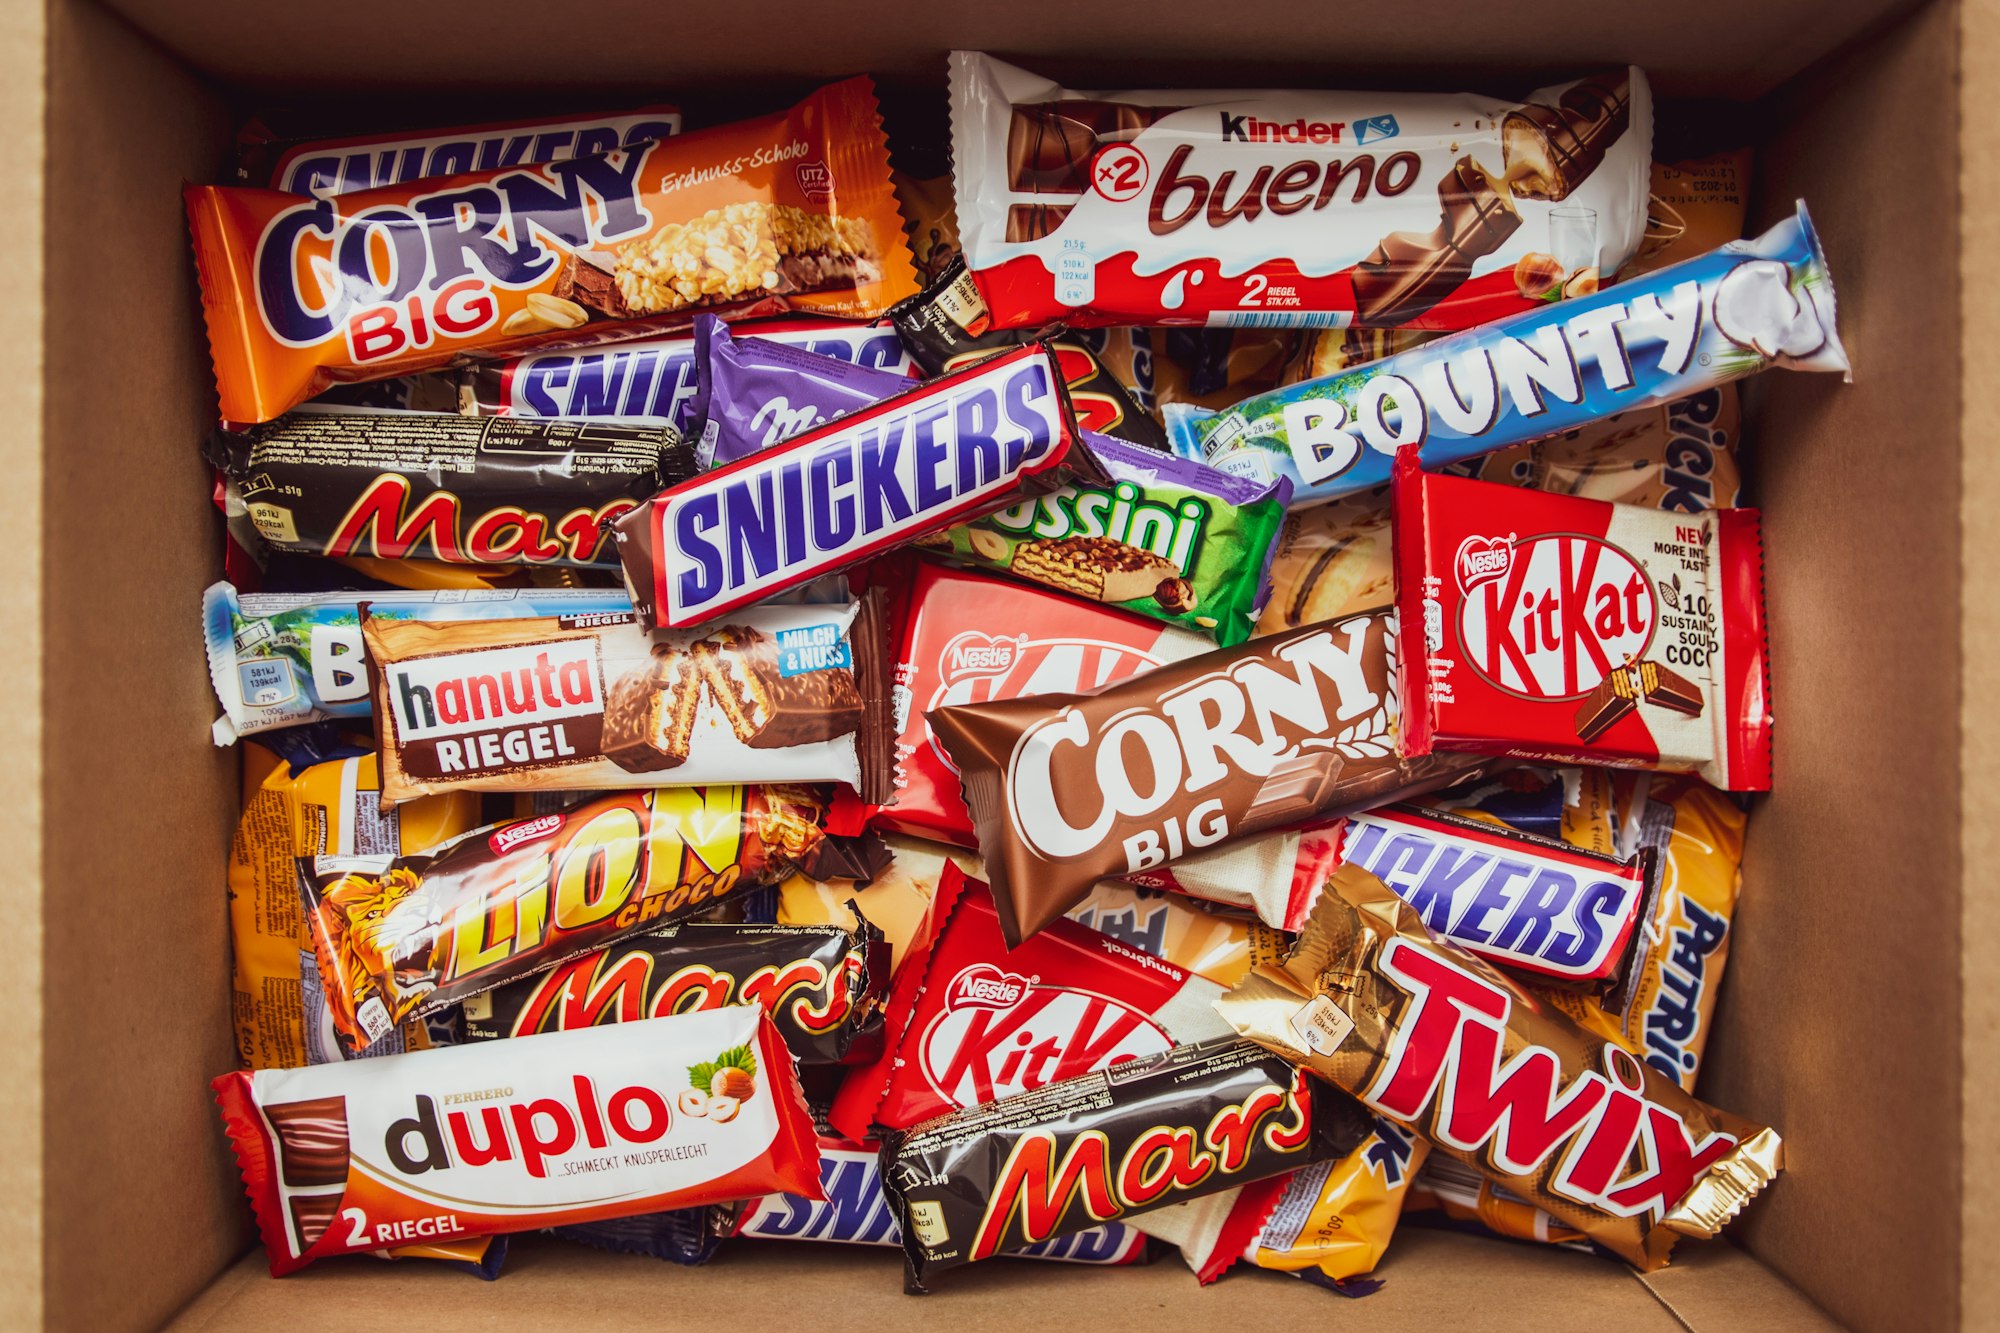 A box full of candy bars.